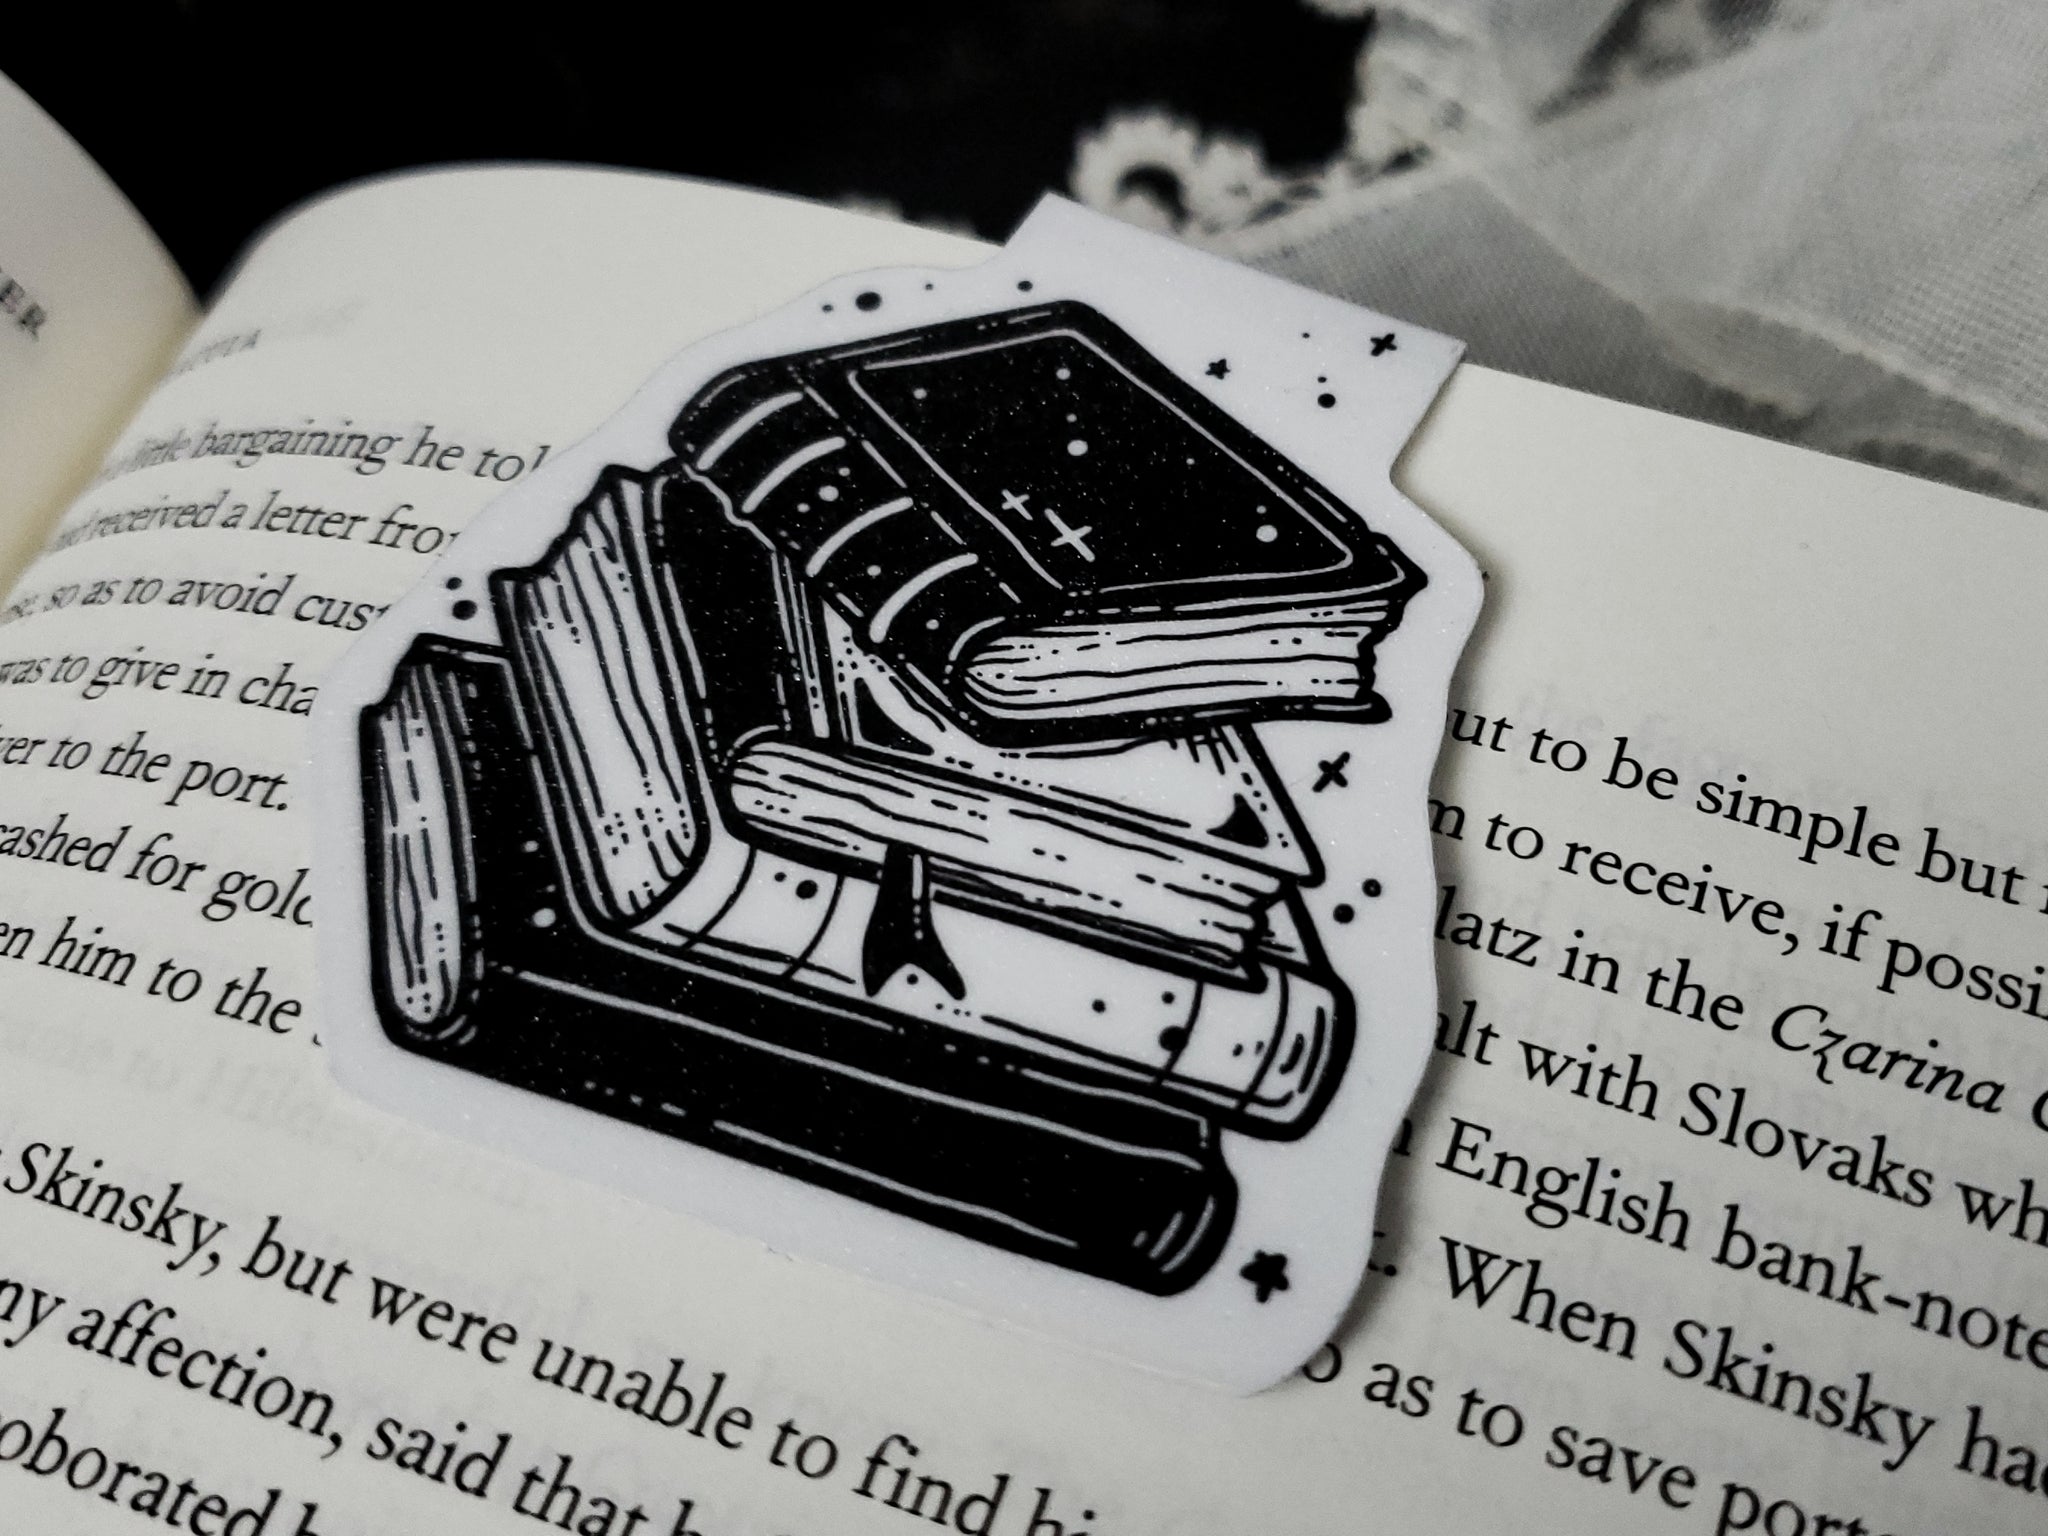 Witchy book stack Magnetic Bookmark